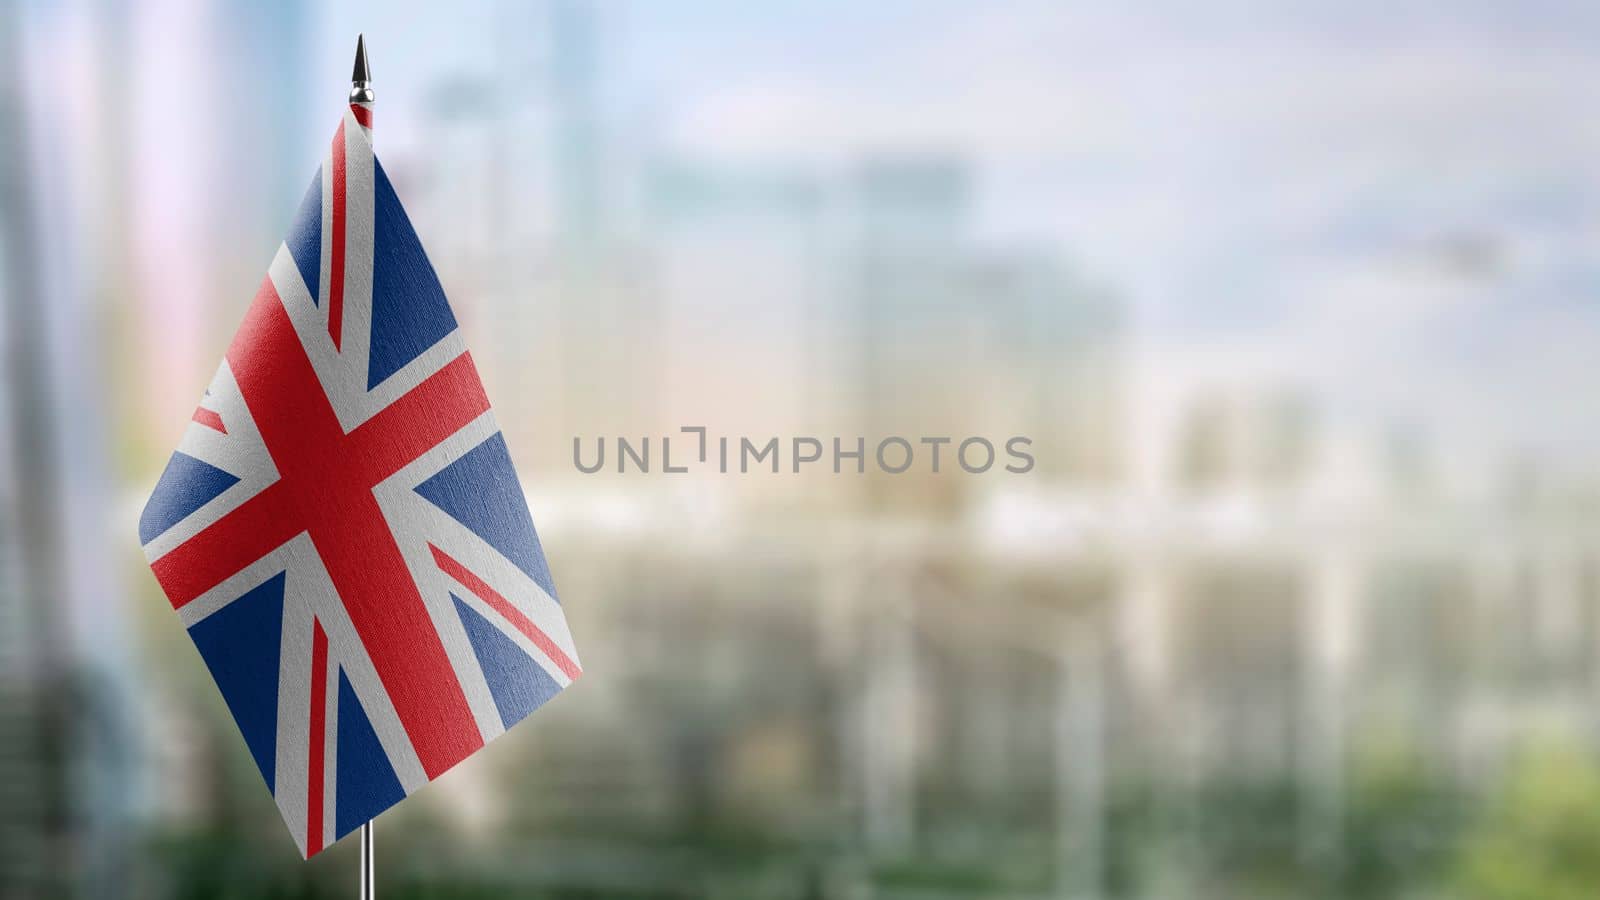 Small flags of the United Kingdom on an abstract blurry background by butenkow